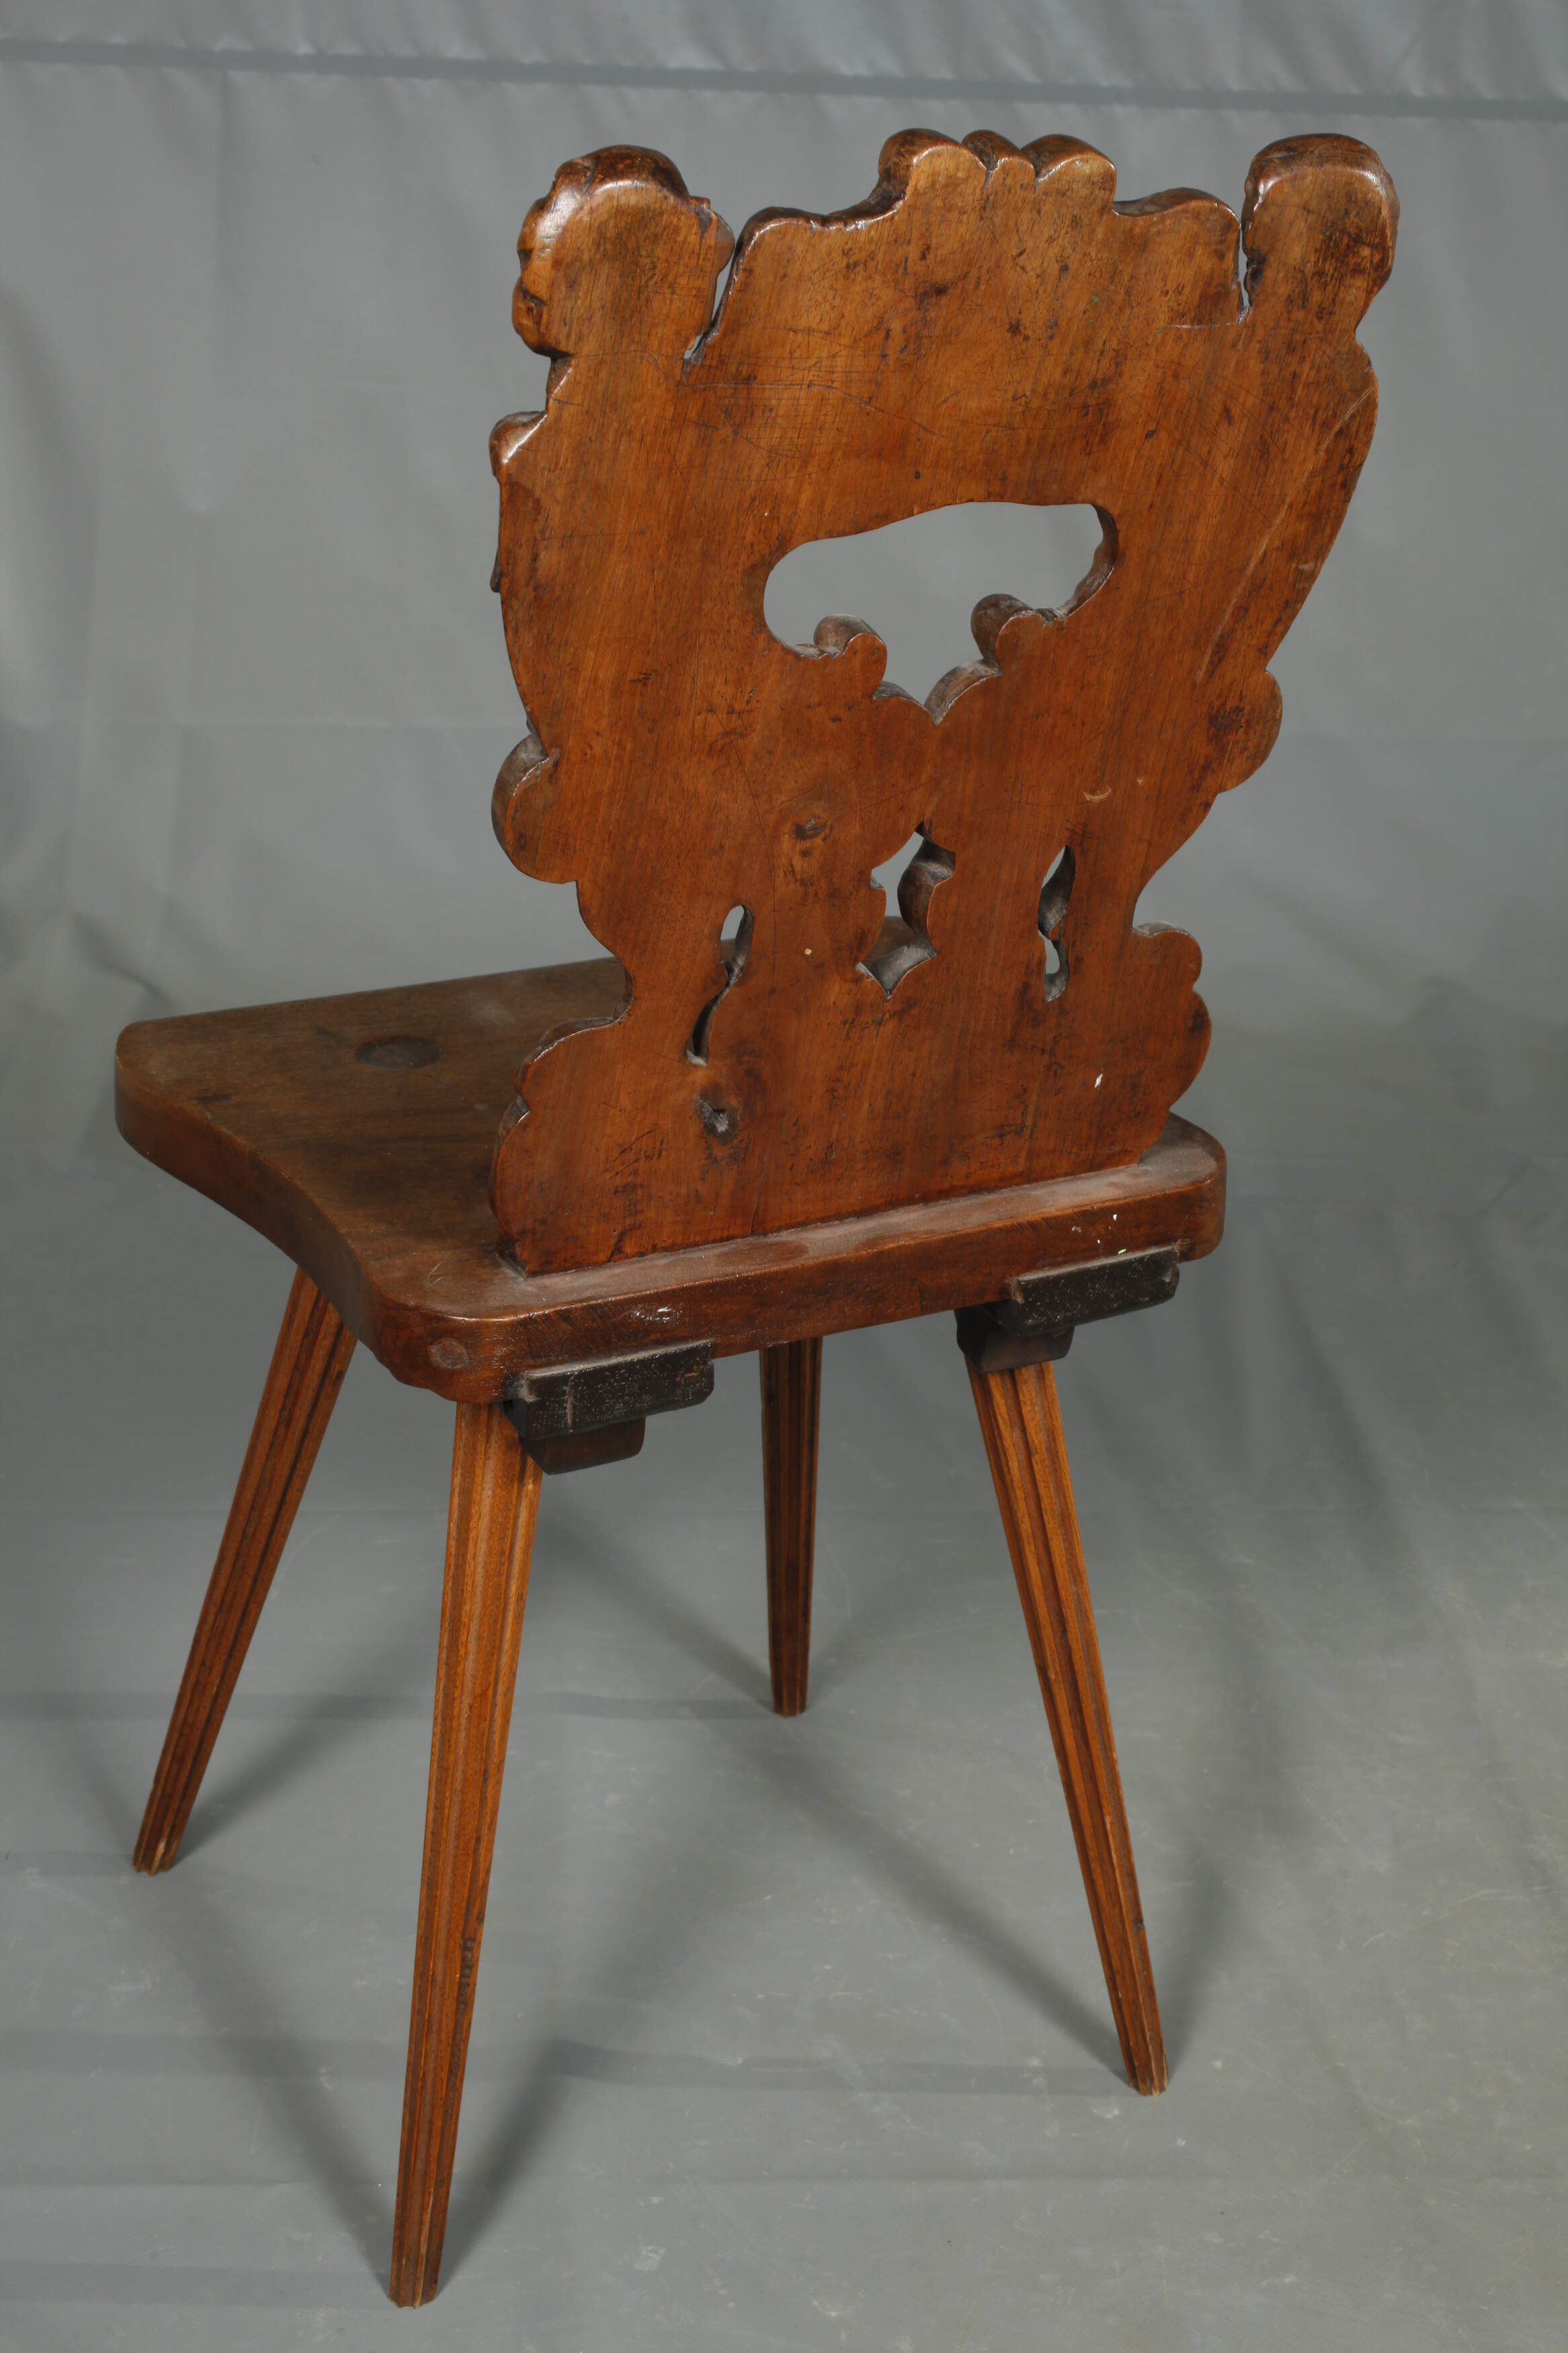 Baroque grimacing chair - Image 4 of 4